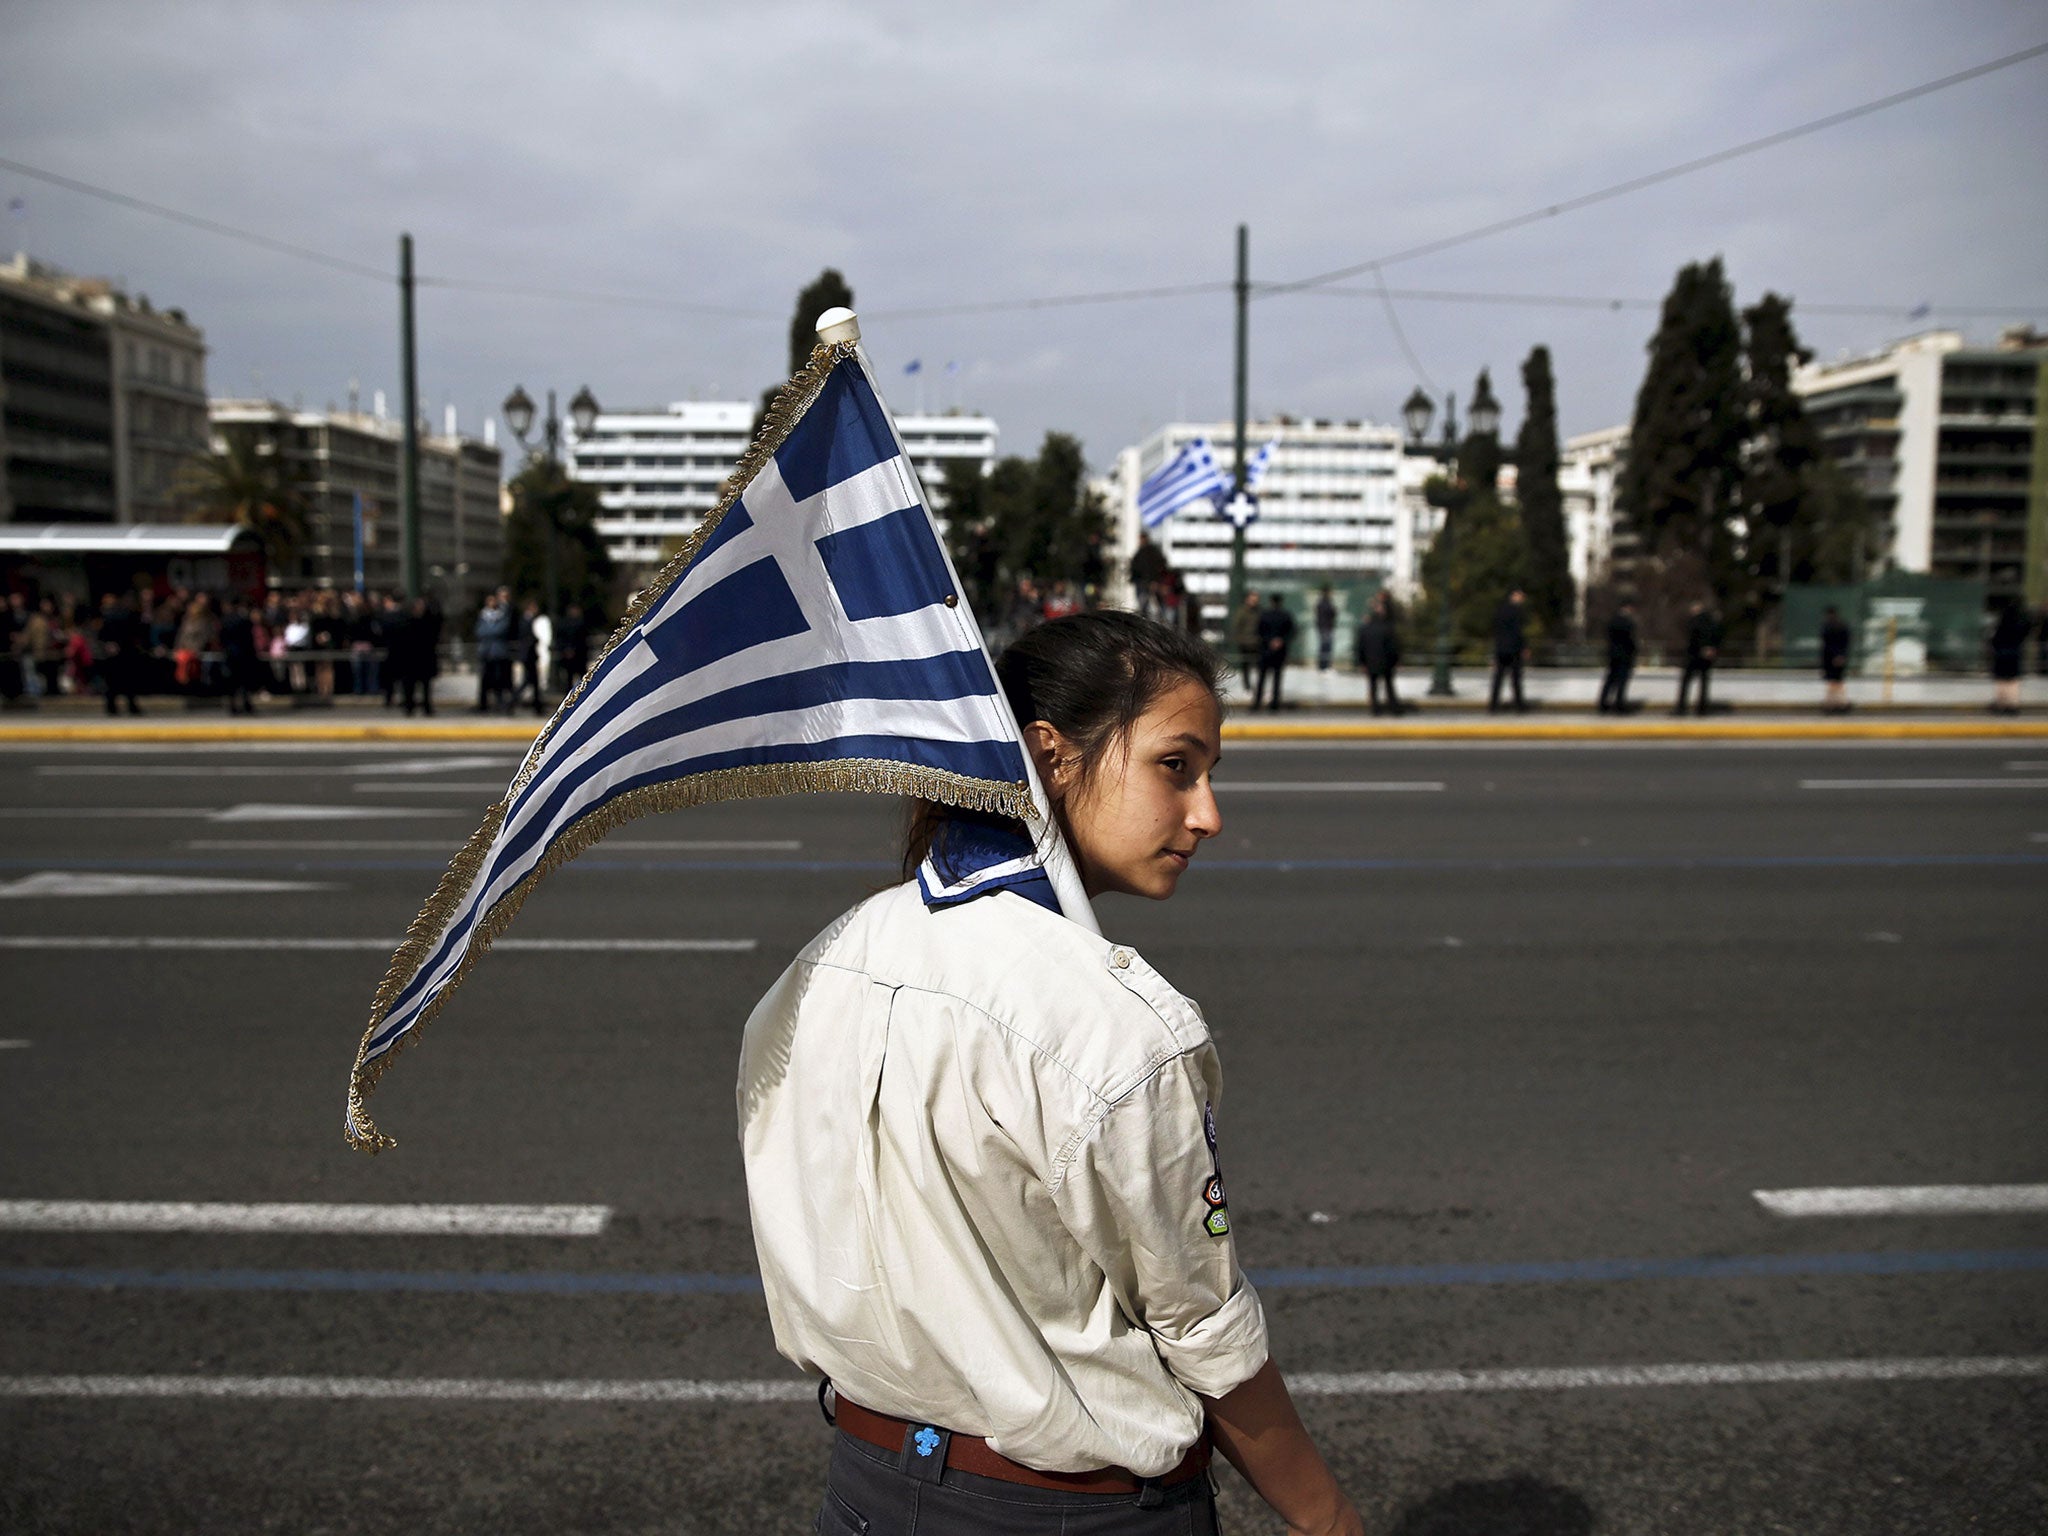 A girl scout holds a Greek national flag ahead of a student parade in Athens, a day before a military parade to mark Greece's Independence Day